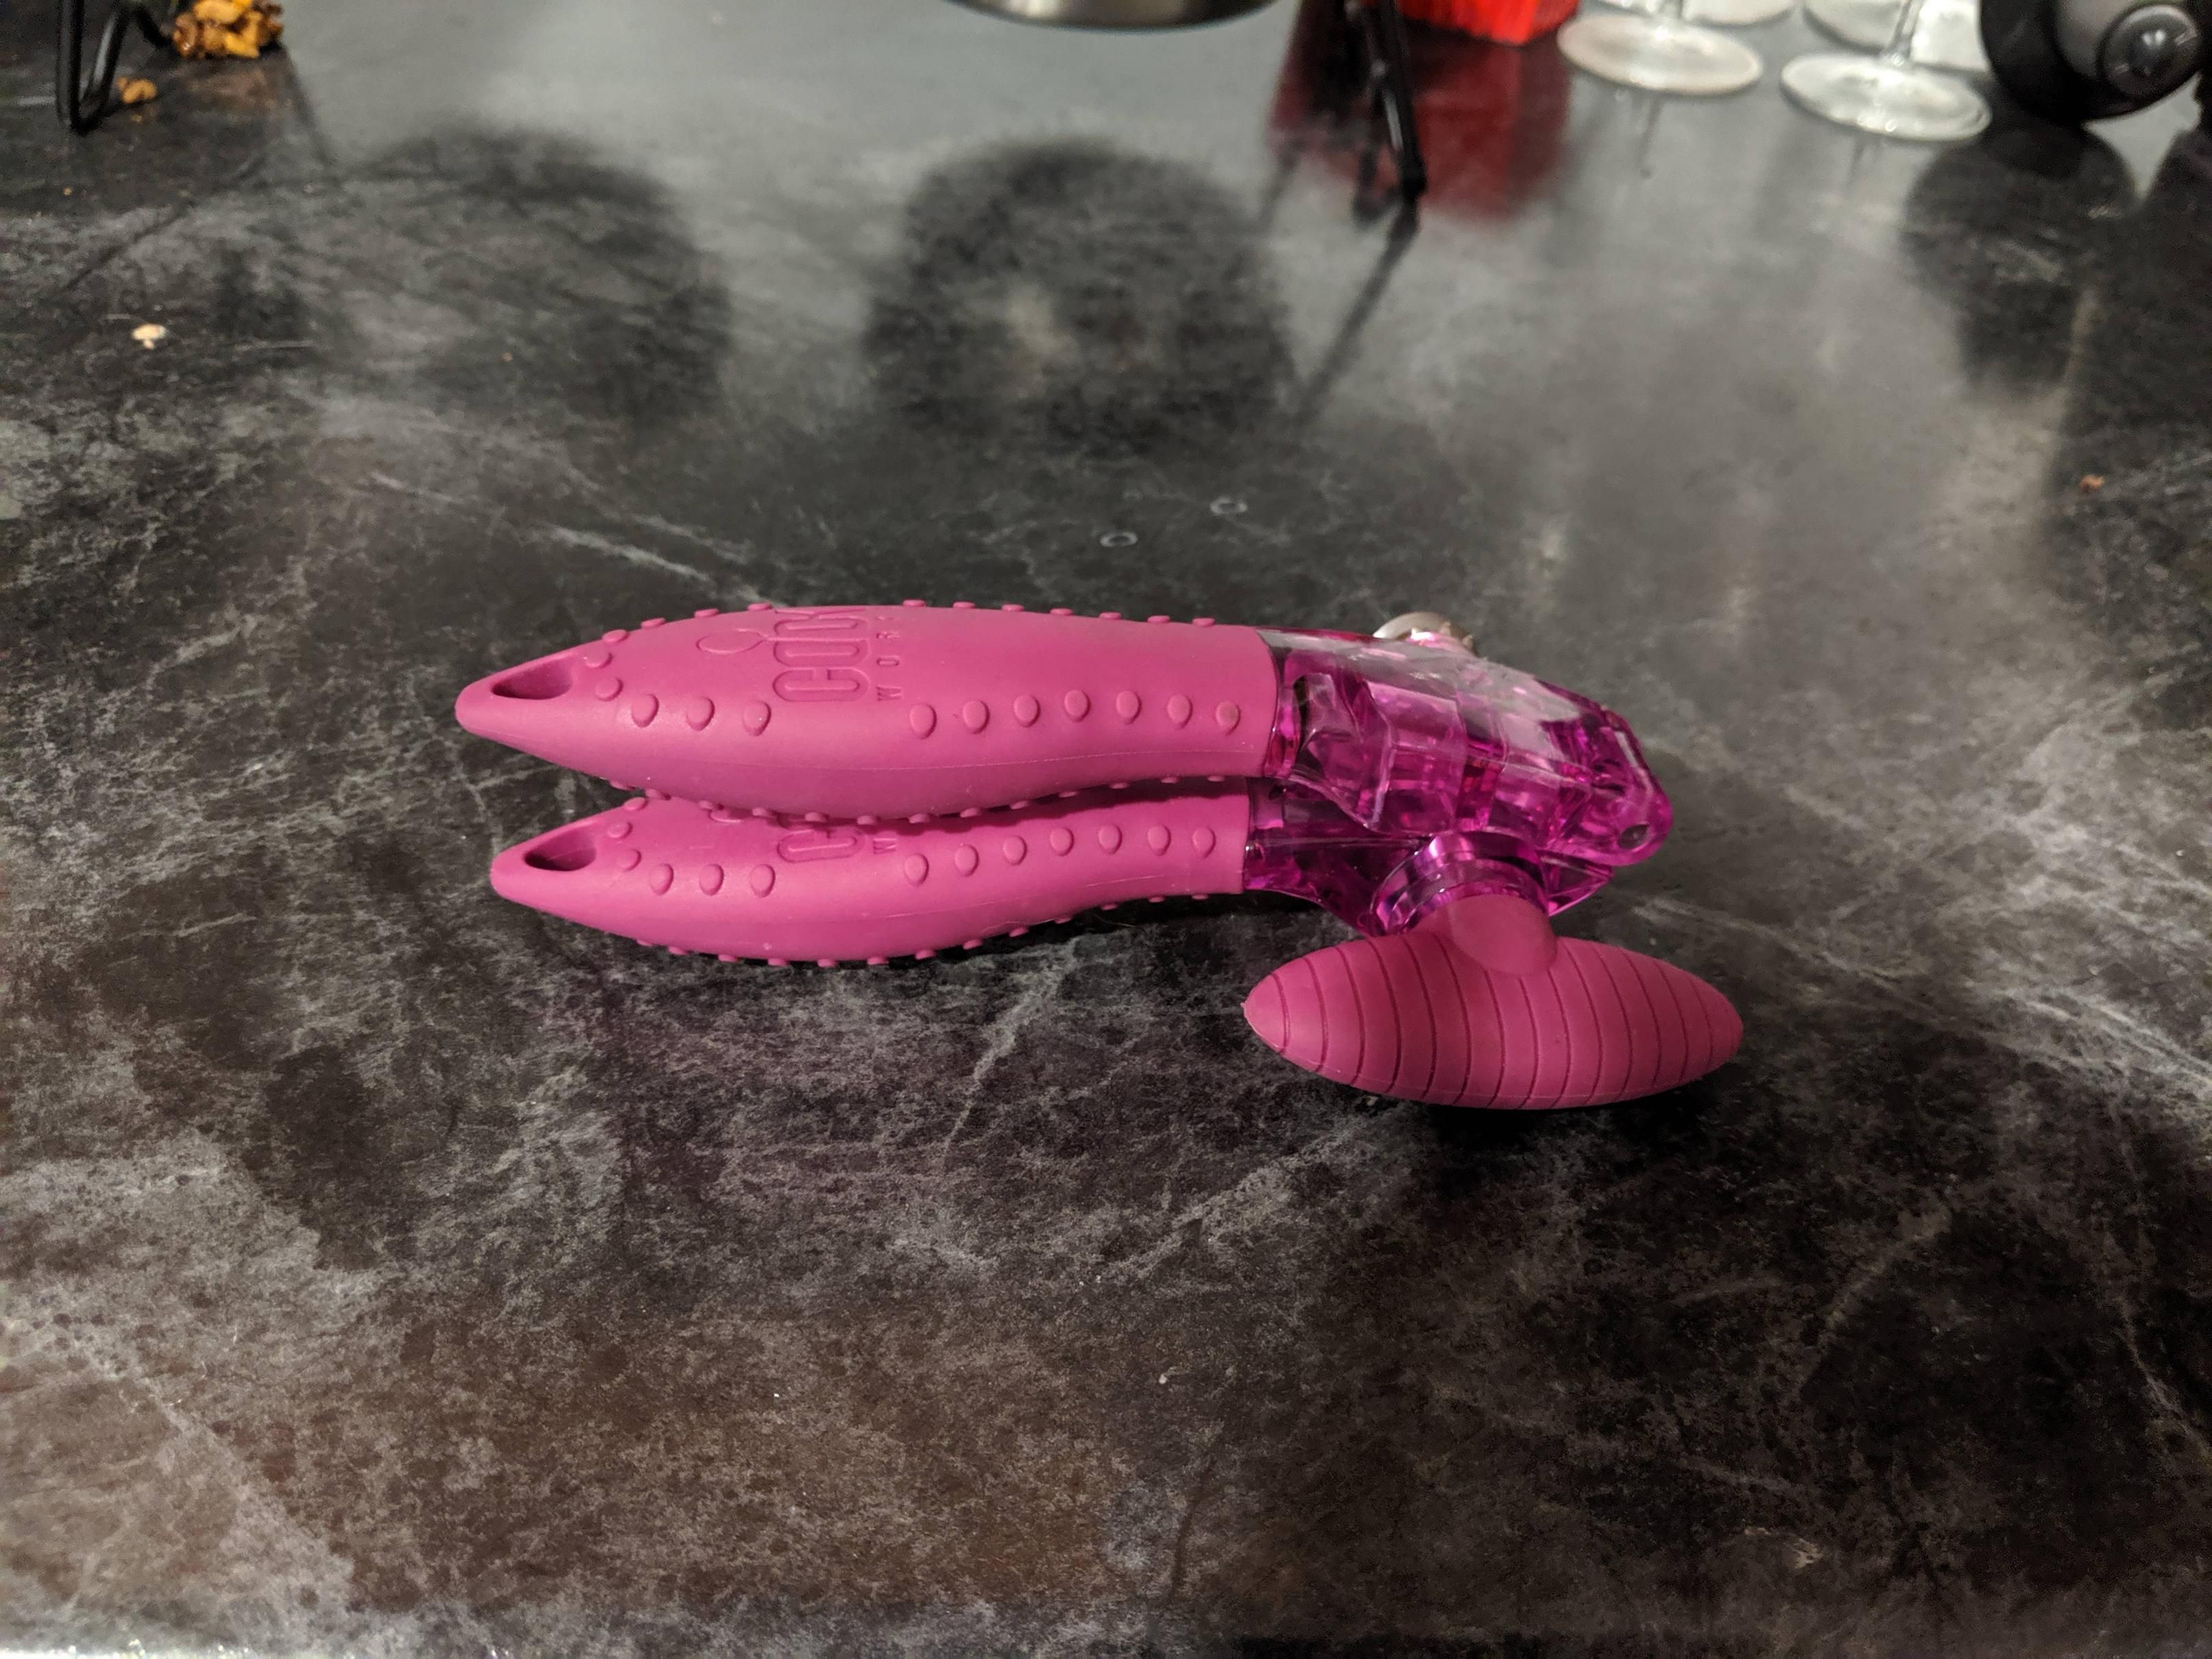 Who else thinks my wife's new can opener looks like a strange sex toy?